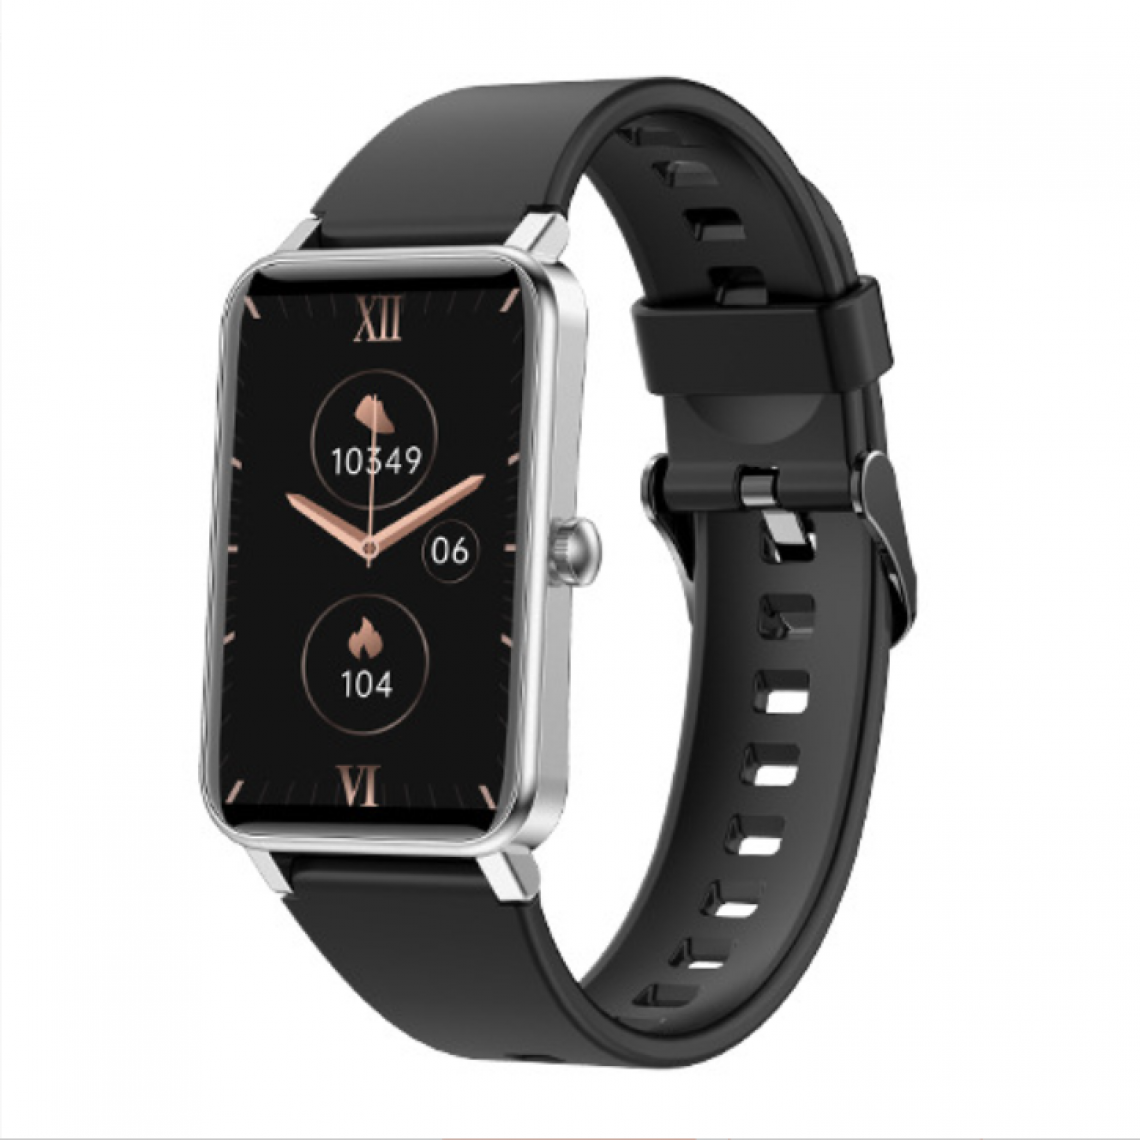 Chronotech Montres - Chronus Smart Watch with Heart Rate Monitor, Pedometer, Large Touch Screen HD Display (Black) - Montre connectée